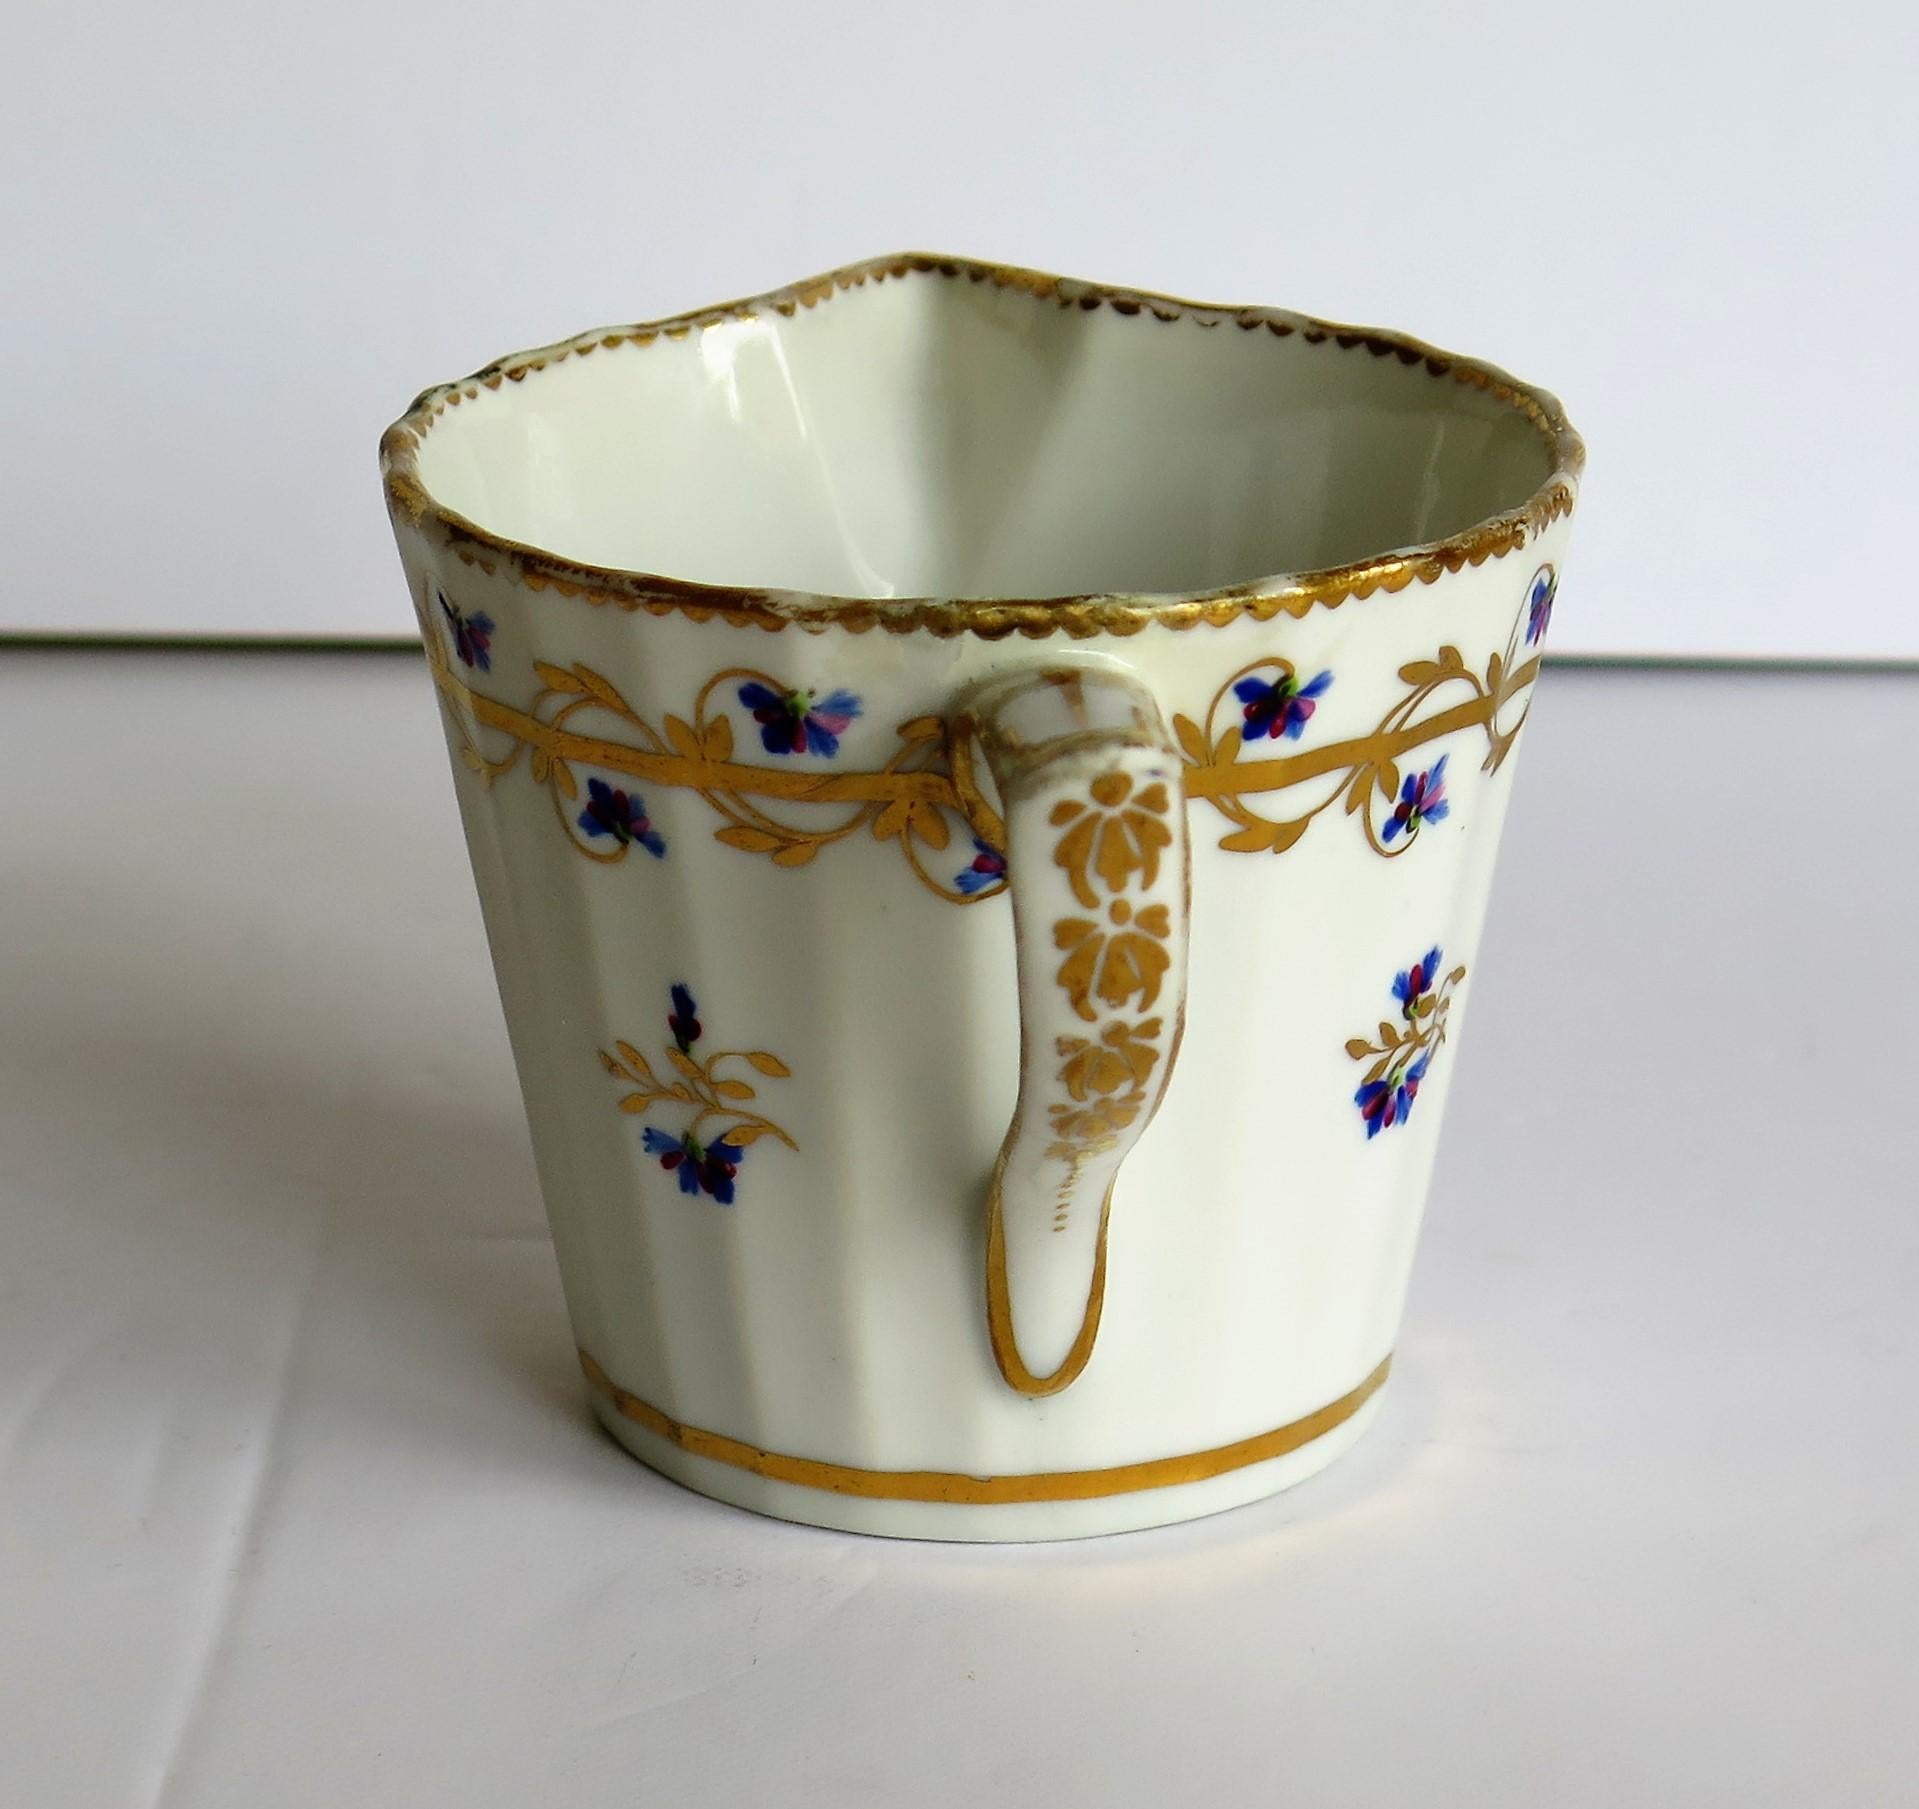 Porcelain Rare 18th Century Derby Milk Jug or Creamer Hand Painted Pattern 111, Puce Mark 